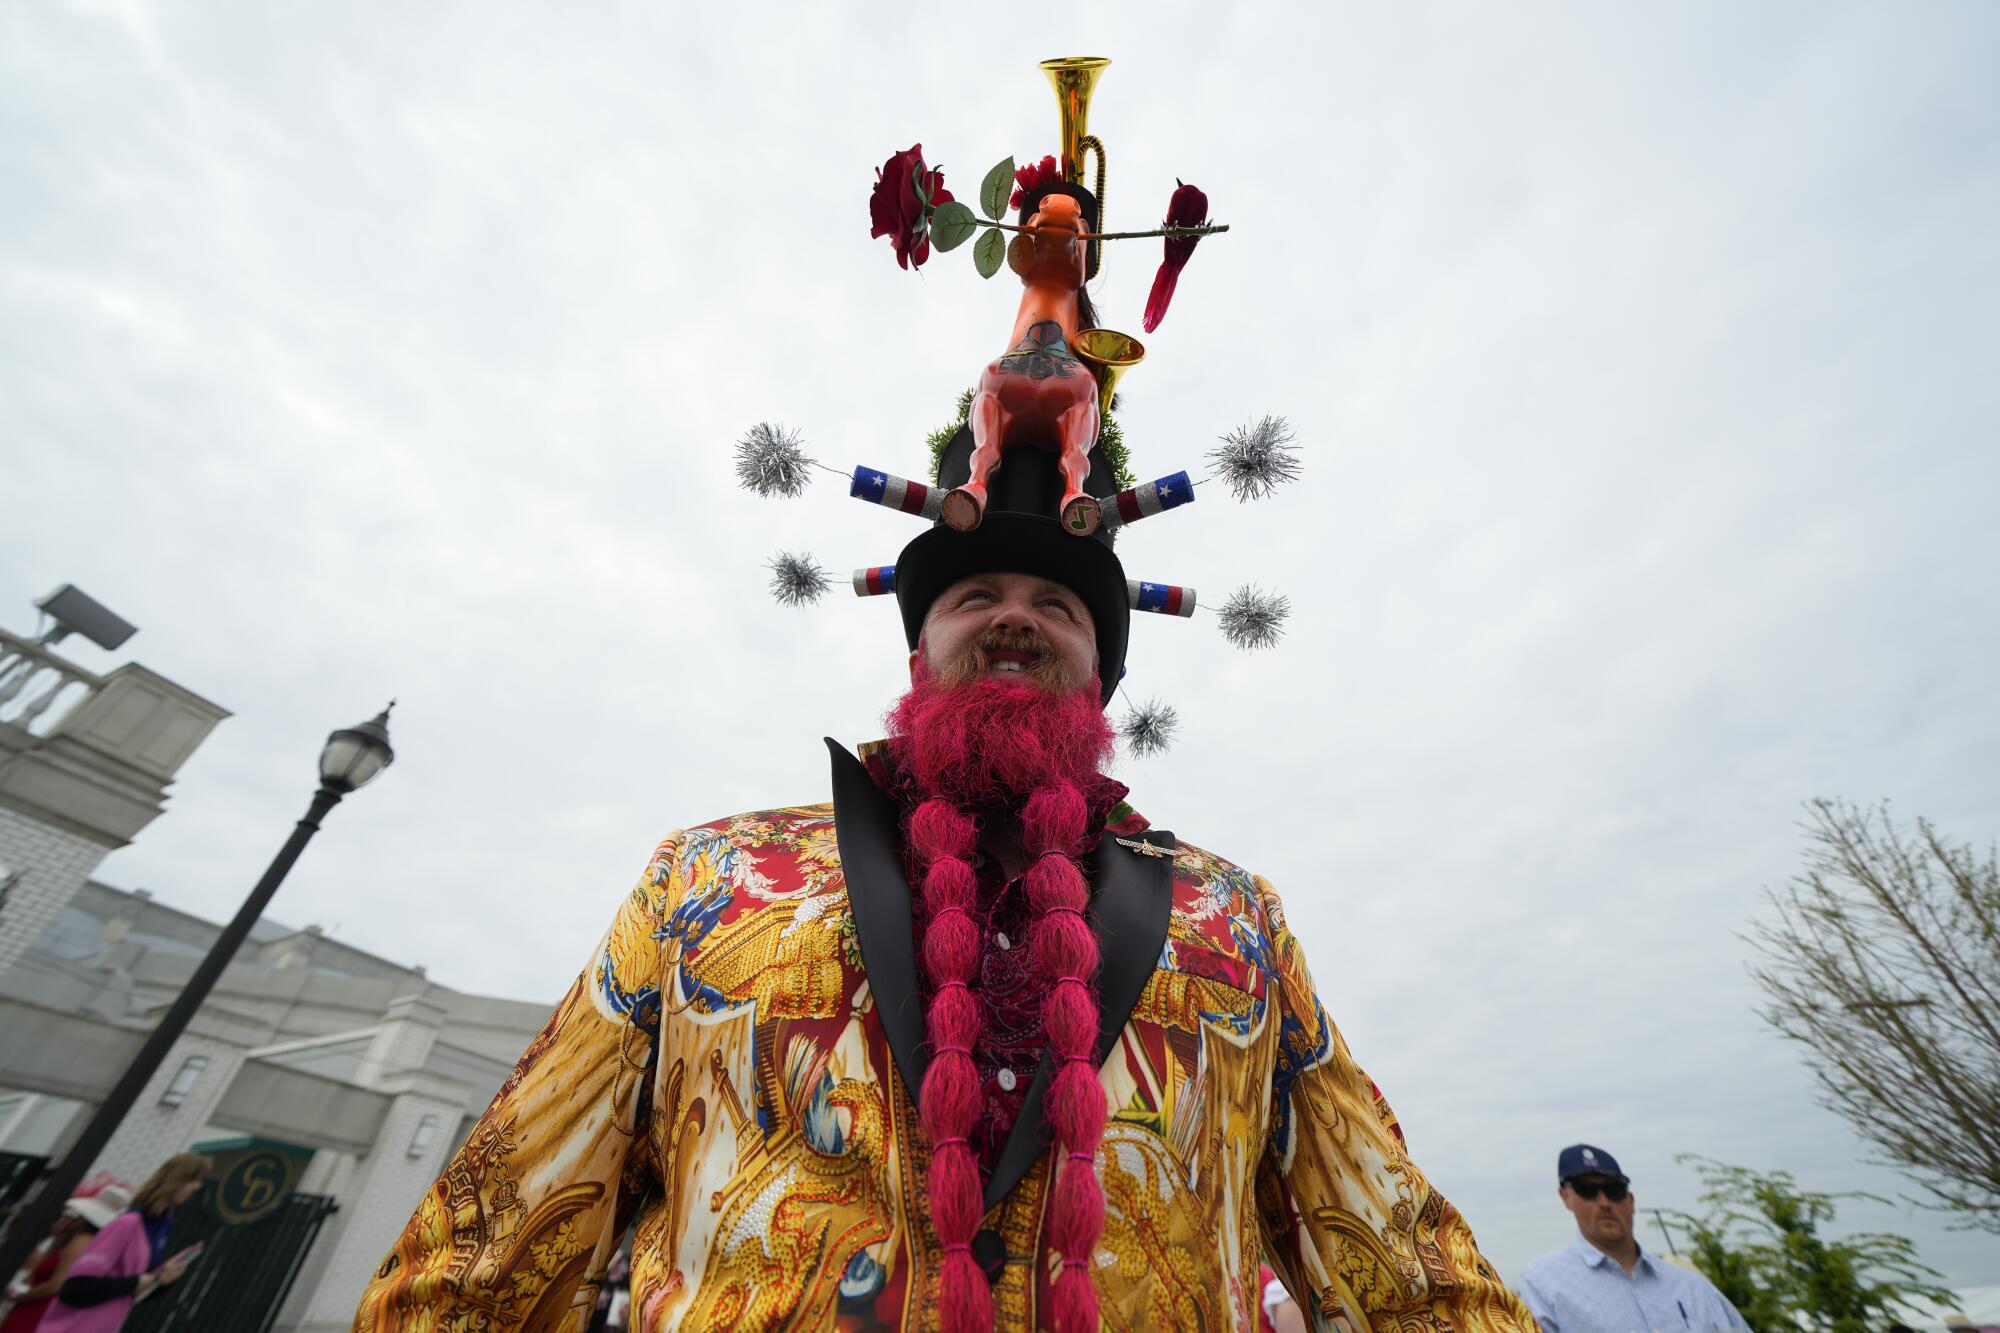 Garey Faulkner from Cincinnati shows off his elaborate suit and hat combination at Churchill Downs on Saturday.